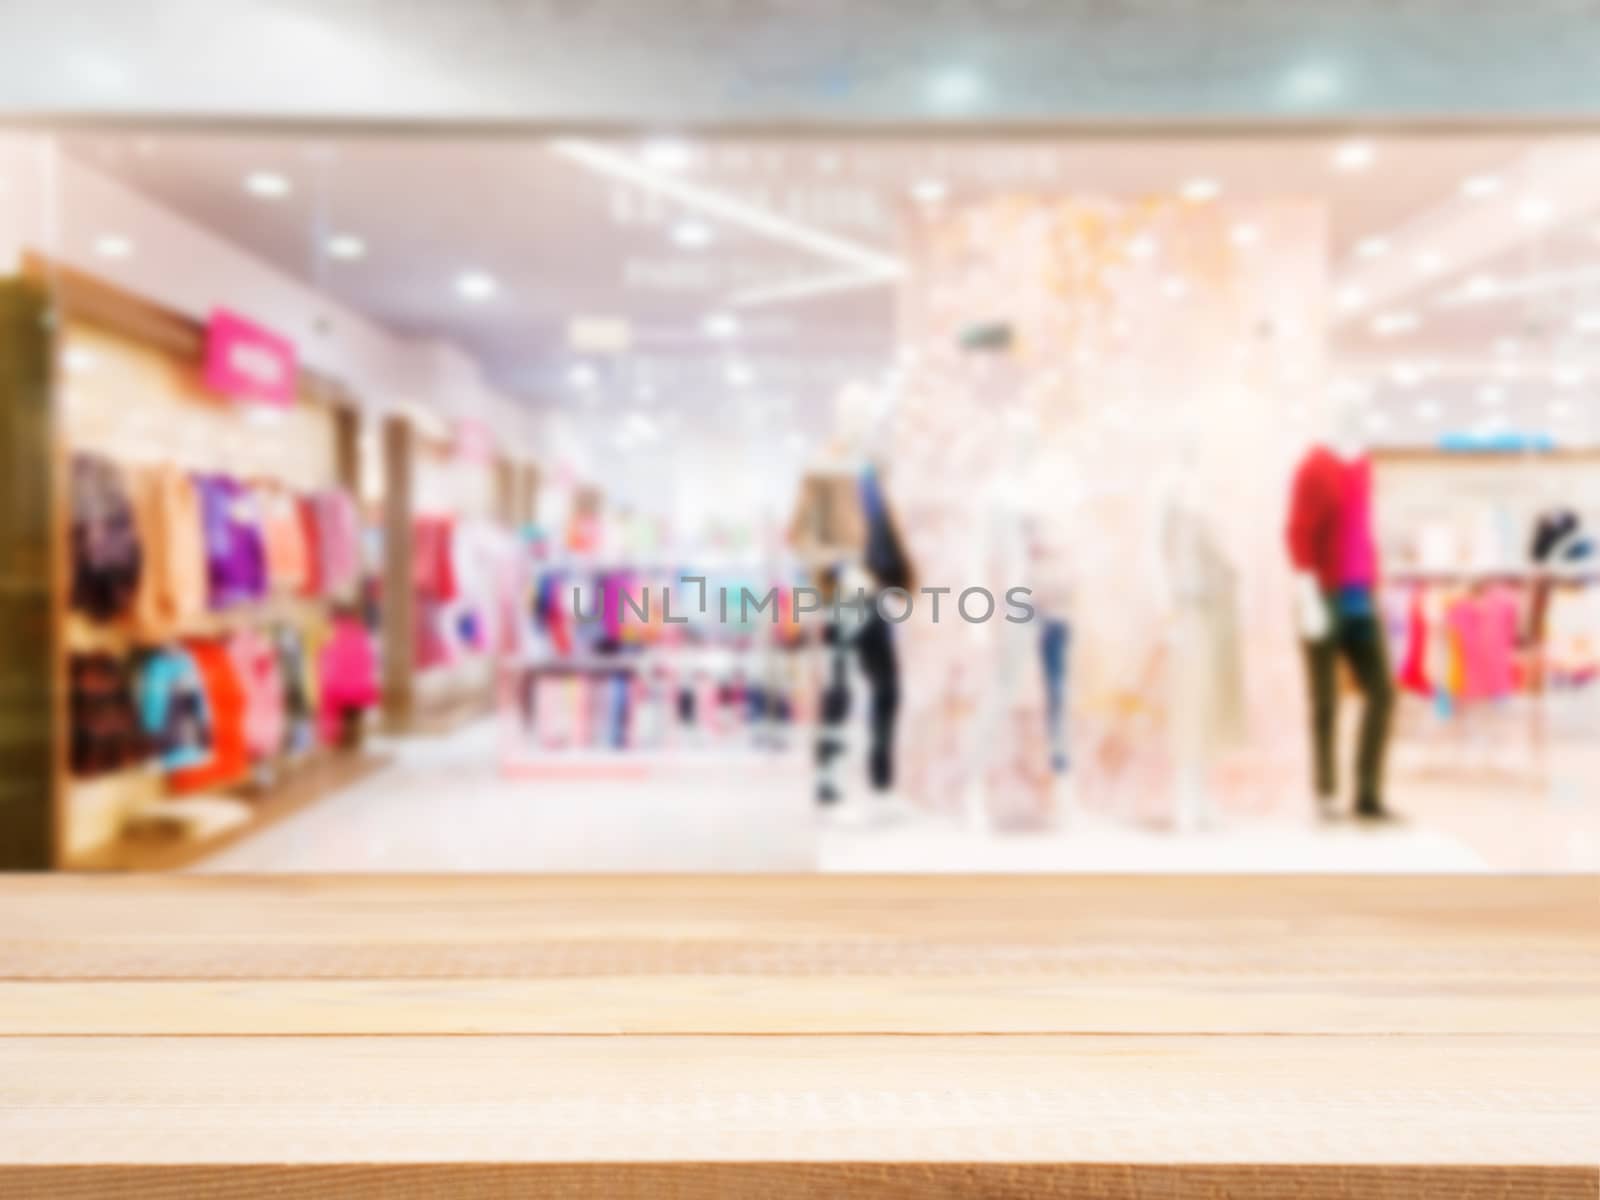 Wooden board empty table in front of blurred background. Perspective light wood table over blur in dress store. Mock up for display or montage your product.